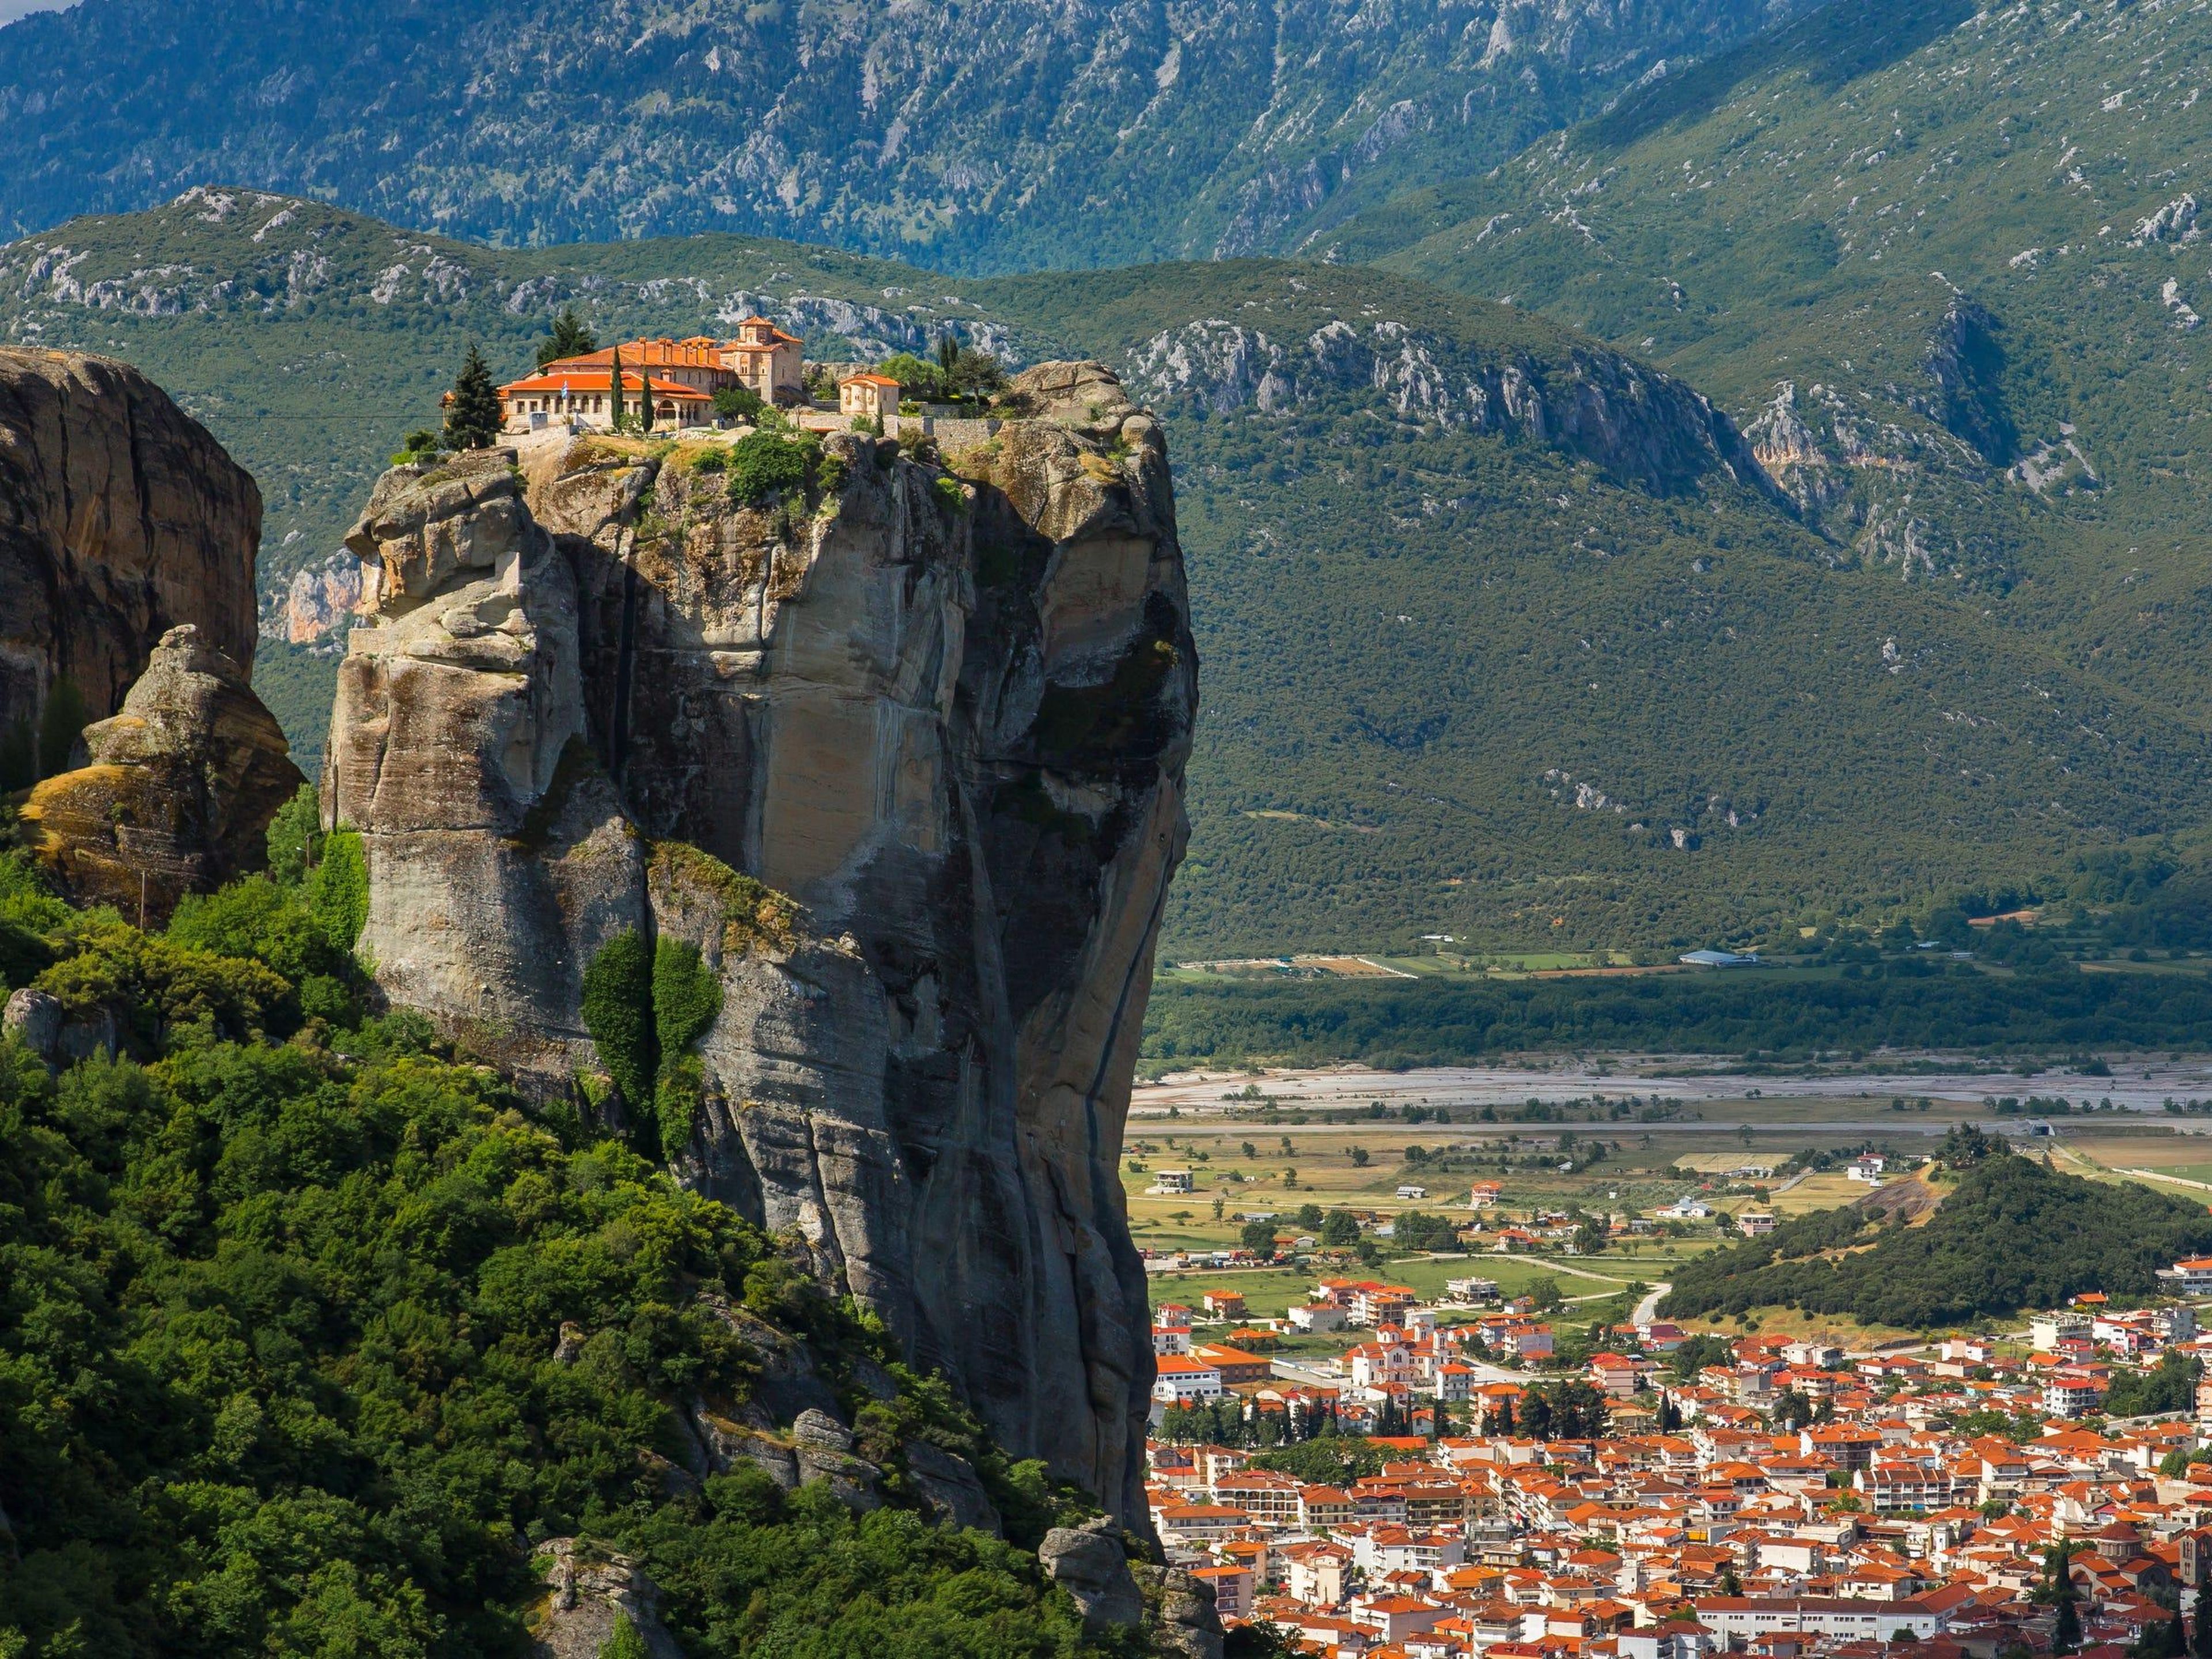 Even further removed is the complex of monasteries known as Meteora in Greece. They sit atop sandstone pillars.